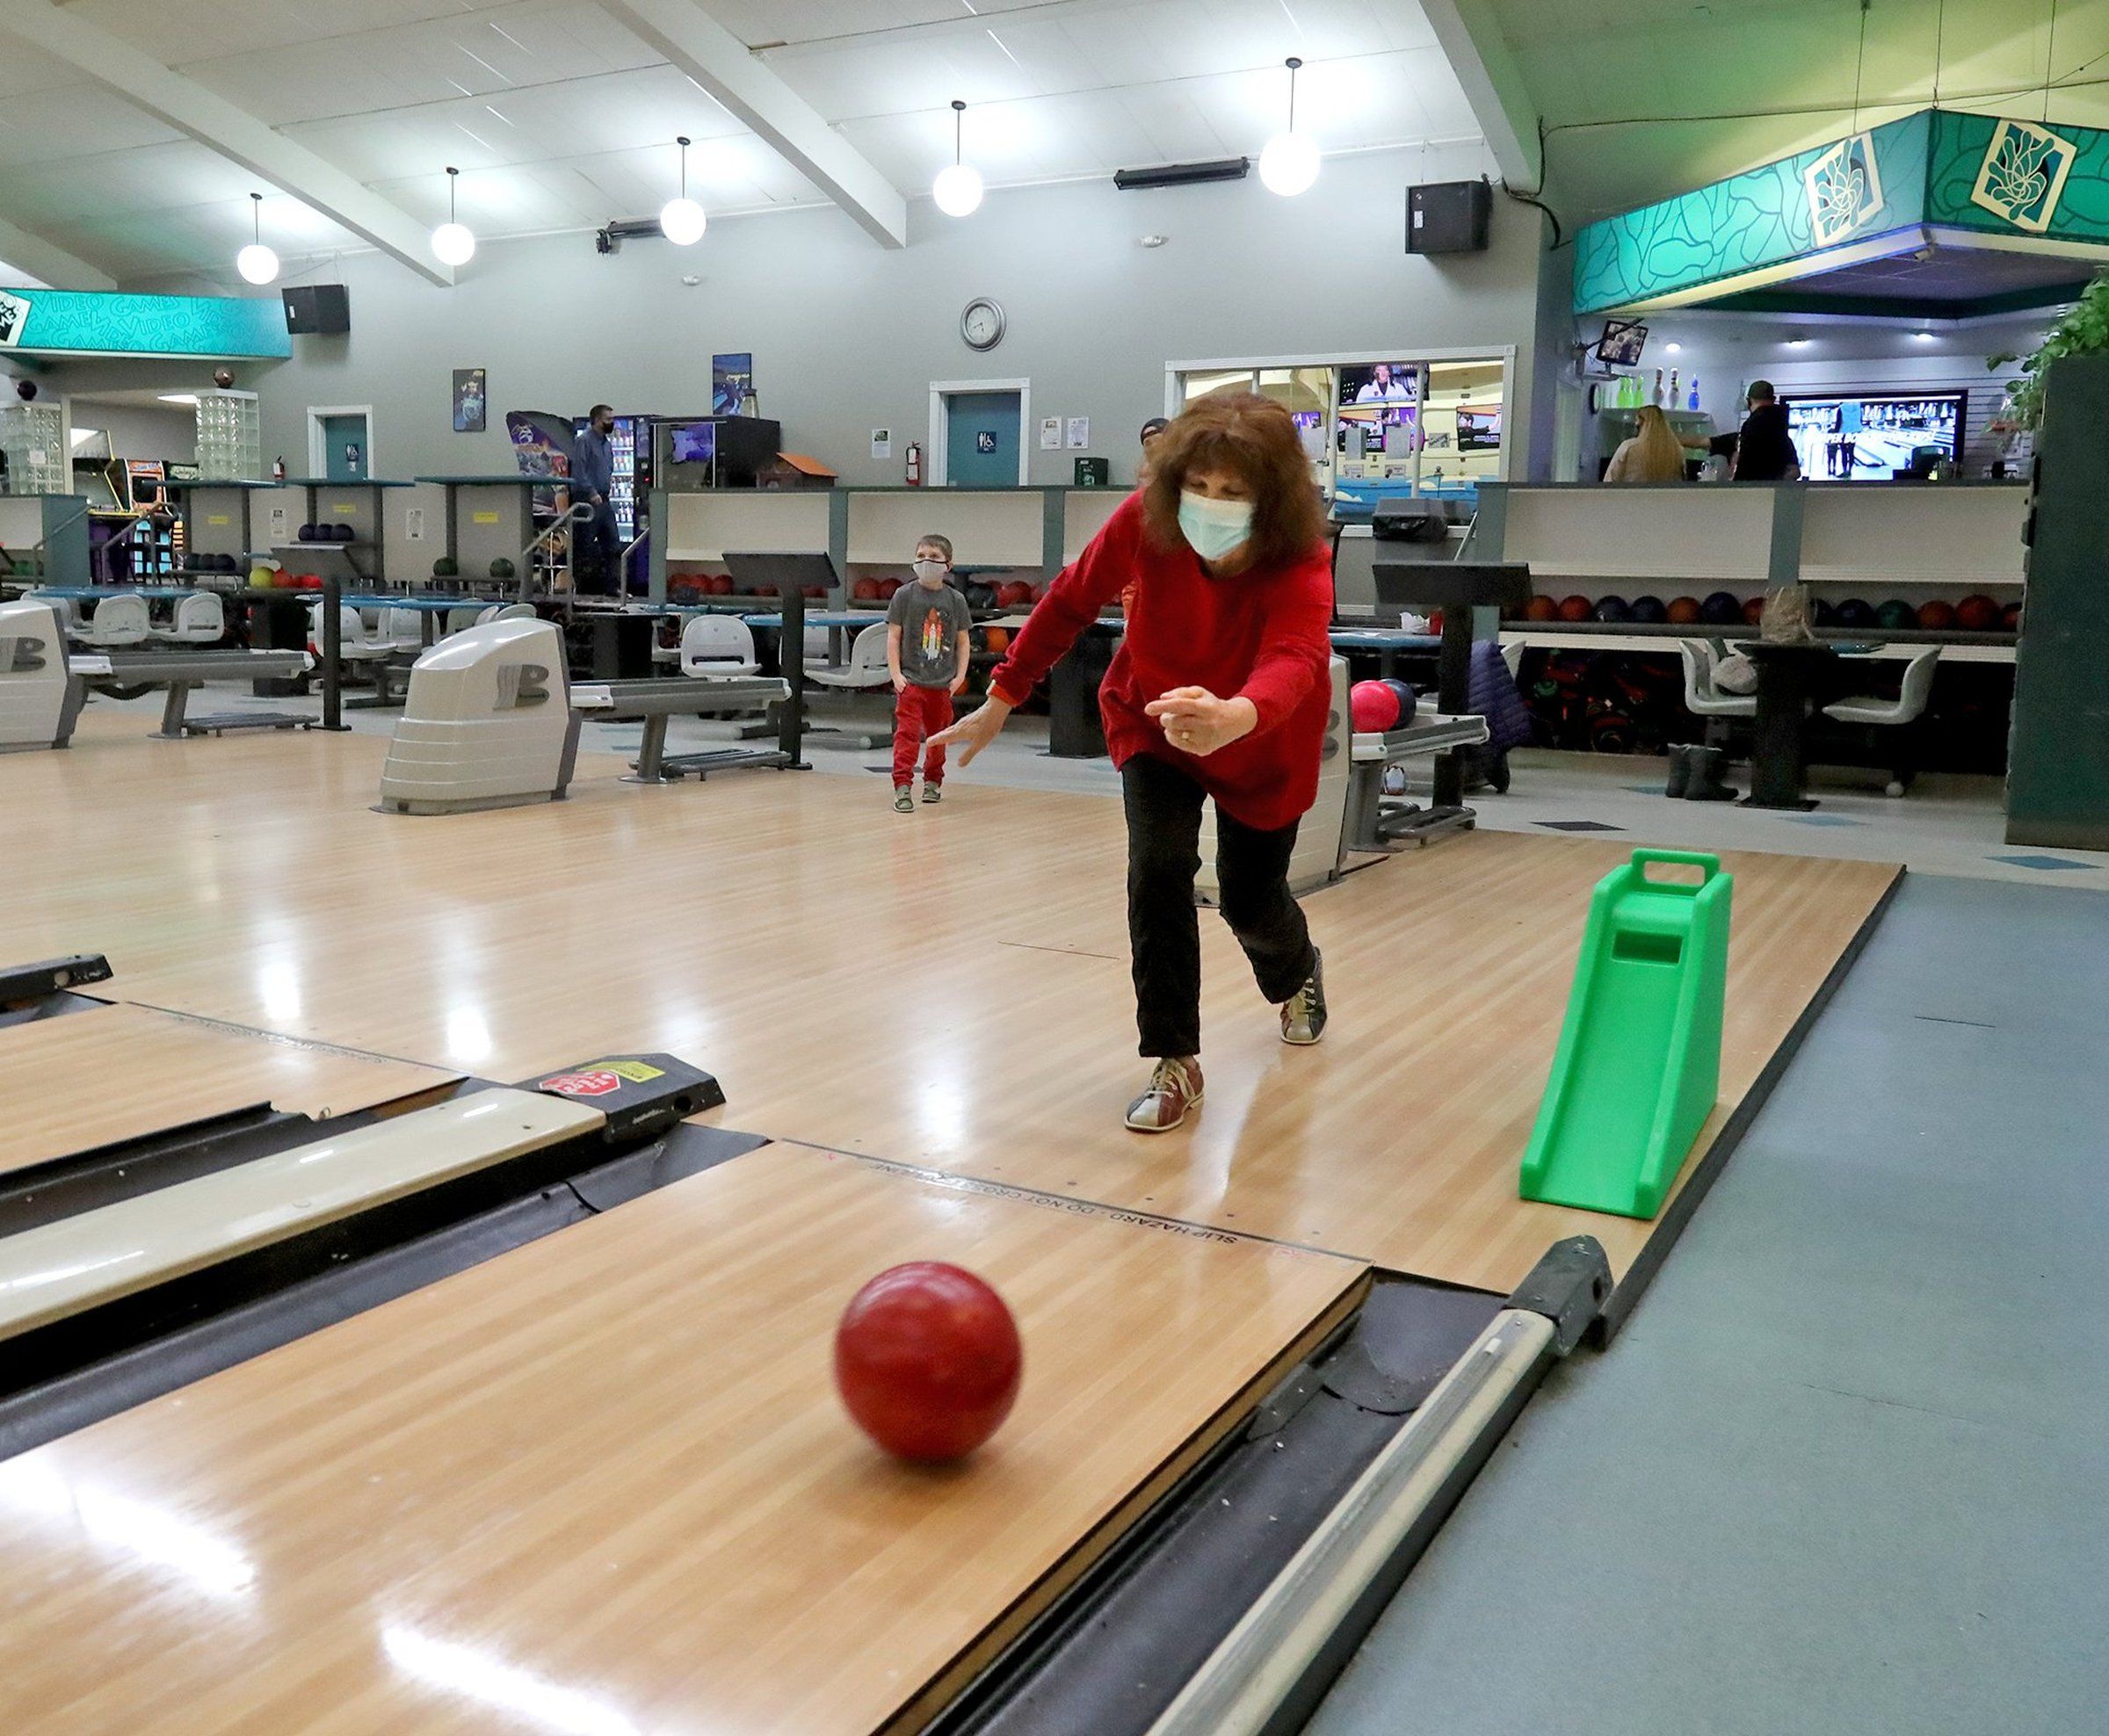 Seattle-area bowling alleys cautiously reopen under COVID-19 guidelines; take a look inside The Seattle Times